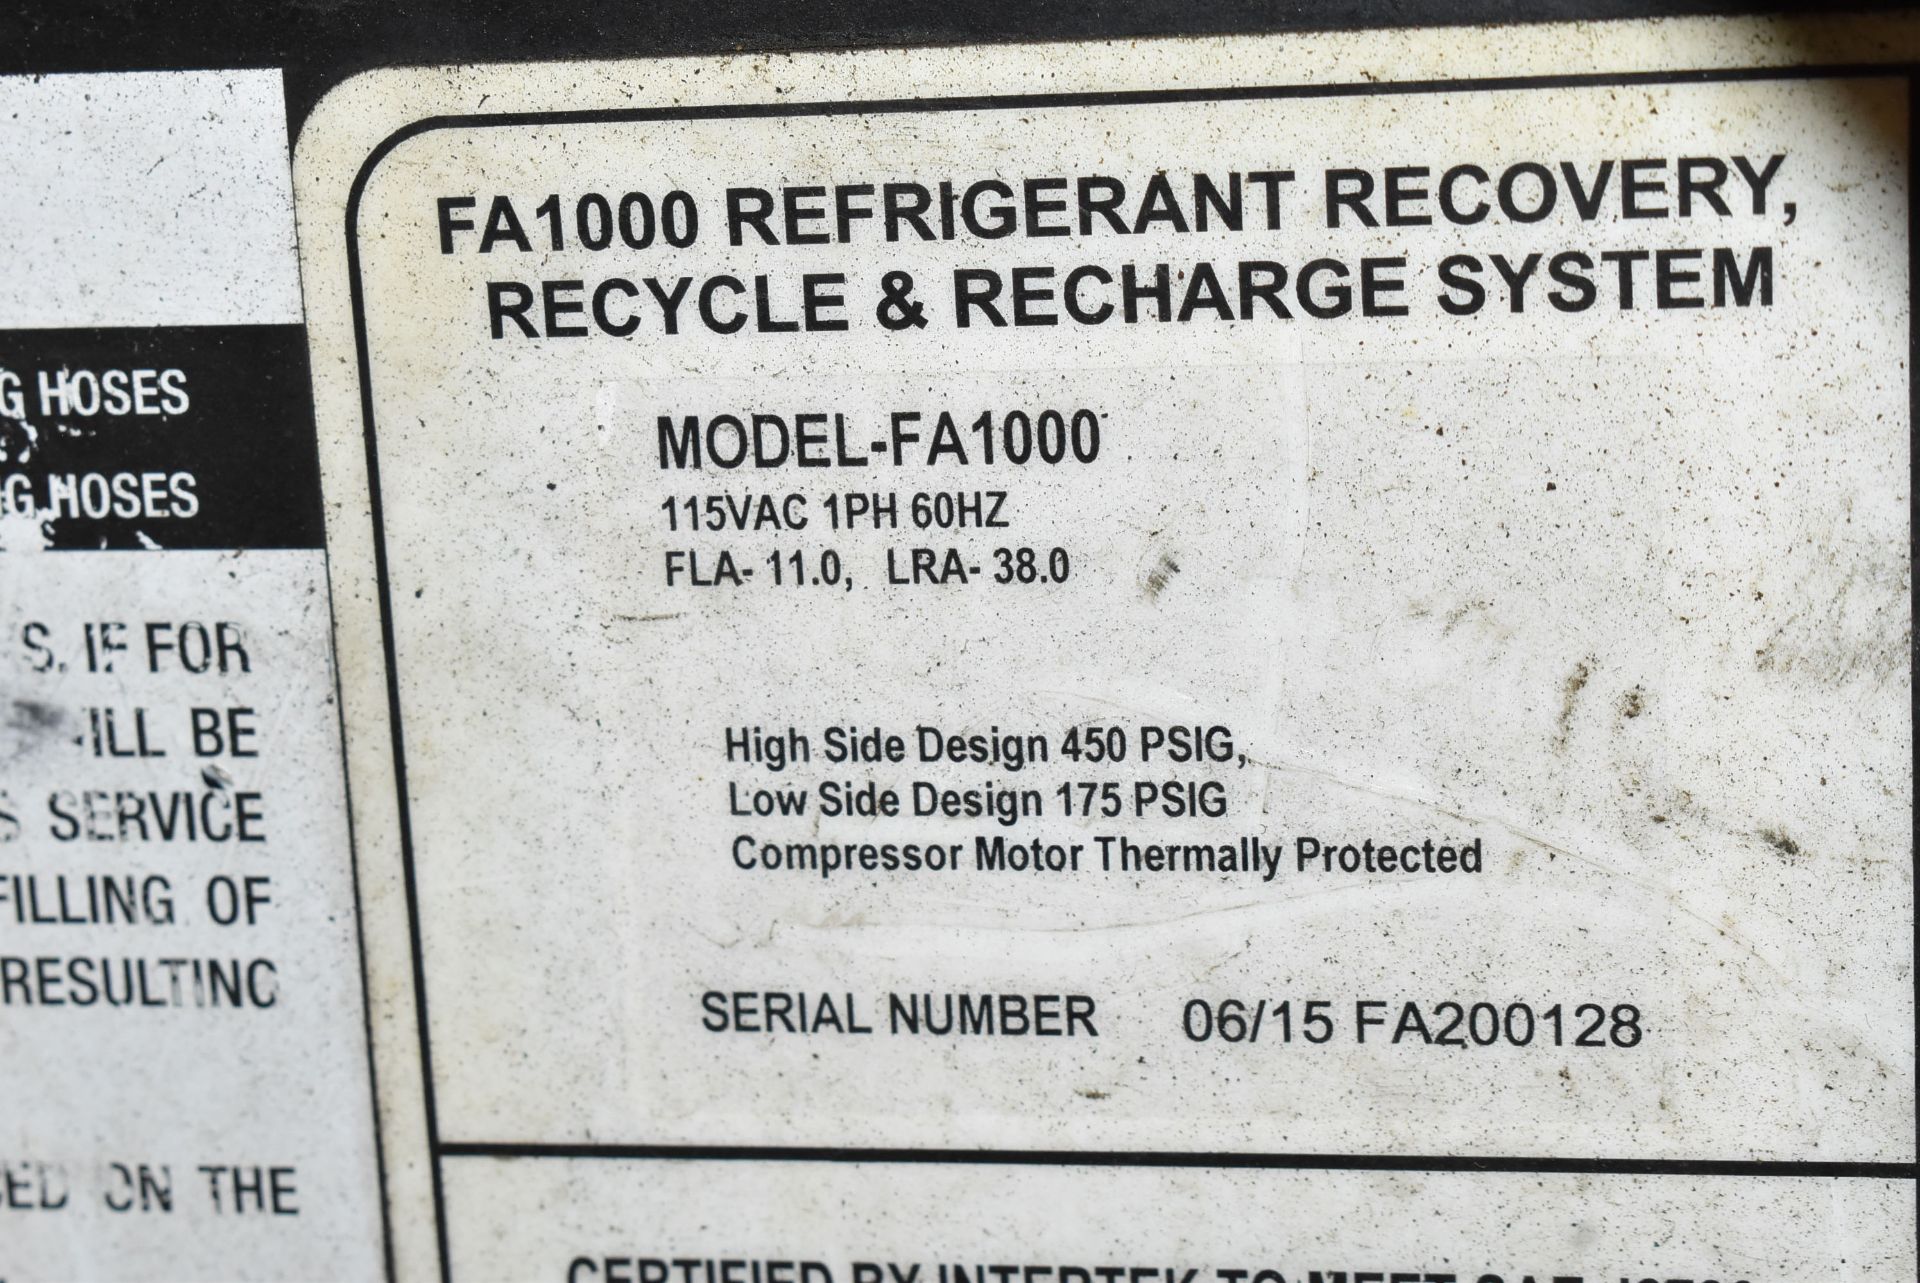 CPS FA1000 MACH 7 REFRIGERANT RECOVERY, RECYCLE & RECHARGE SYSTEM, 115V/1PH/60HZ, S/N 06/15 FA200128 - Image 6 of 6